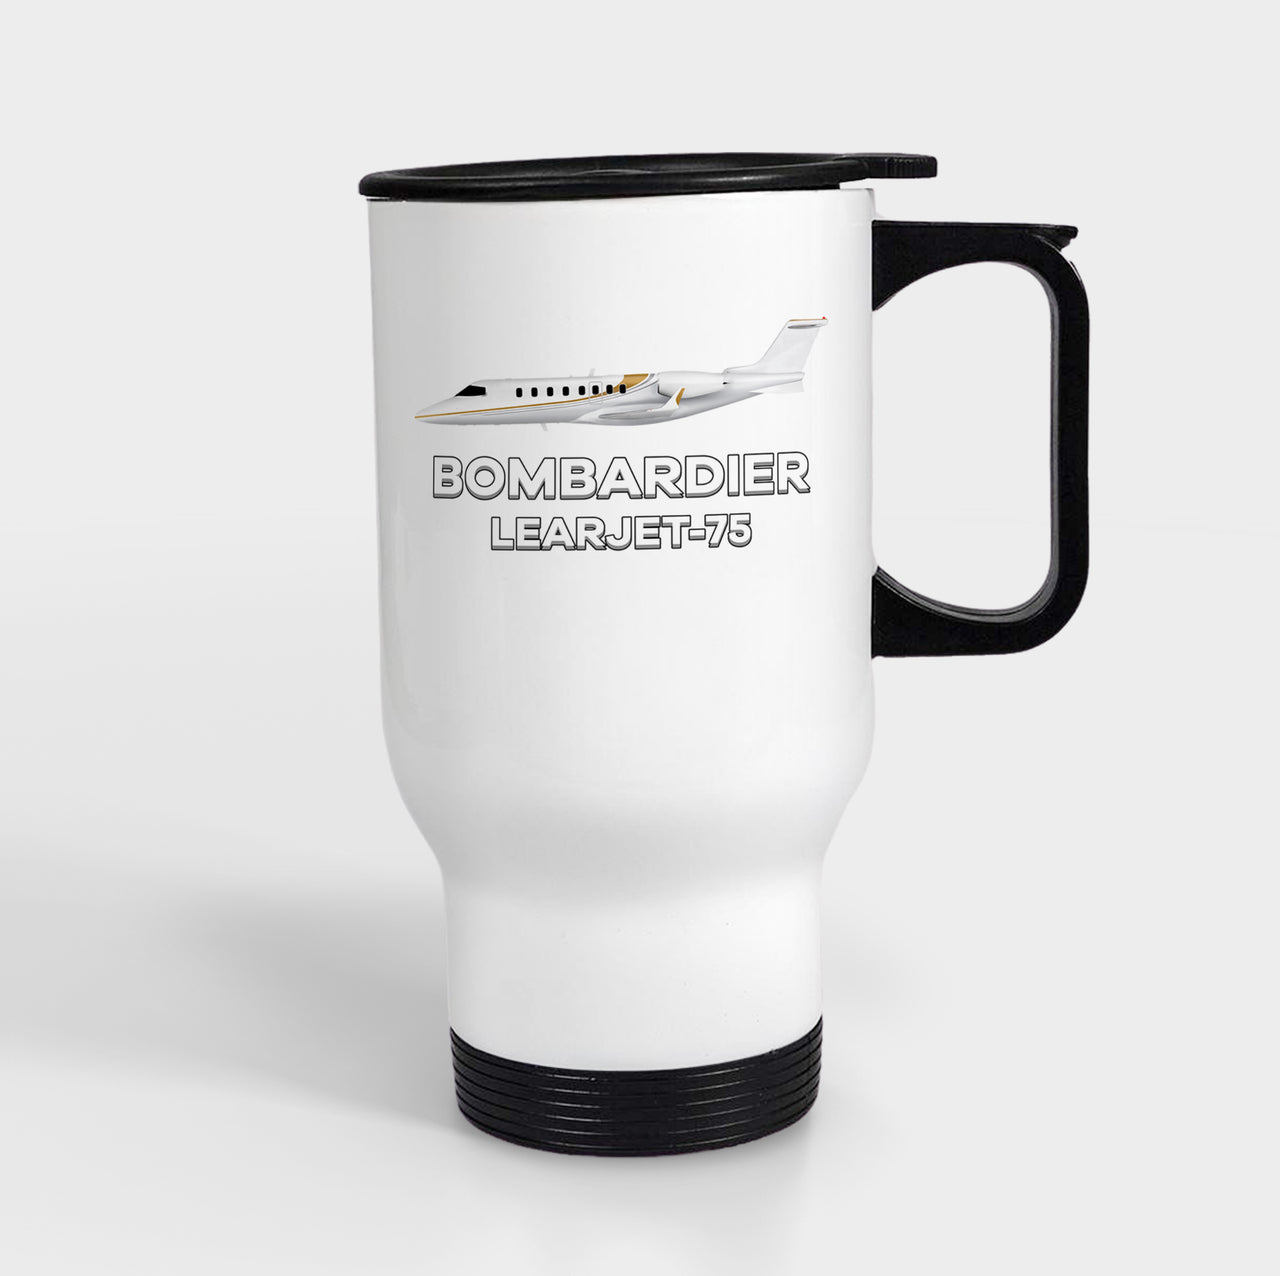 The Bombardier Learjet 75 Designed Travel Mugs (With Holder)